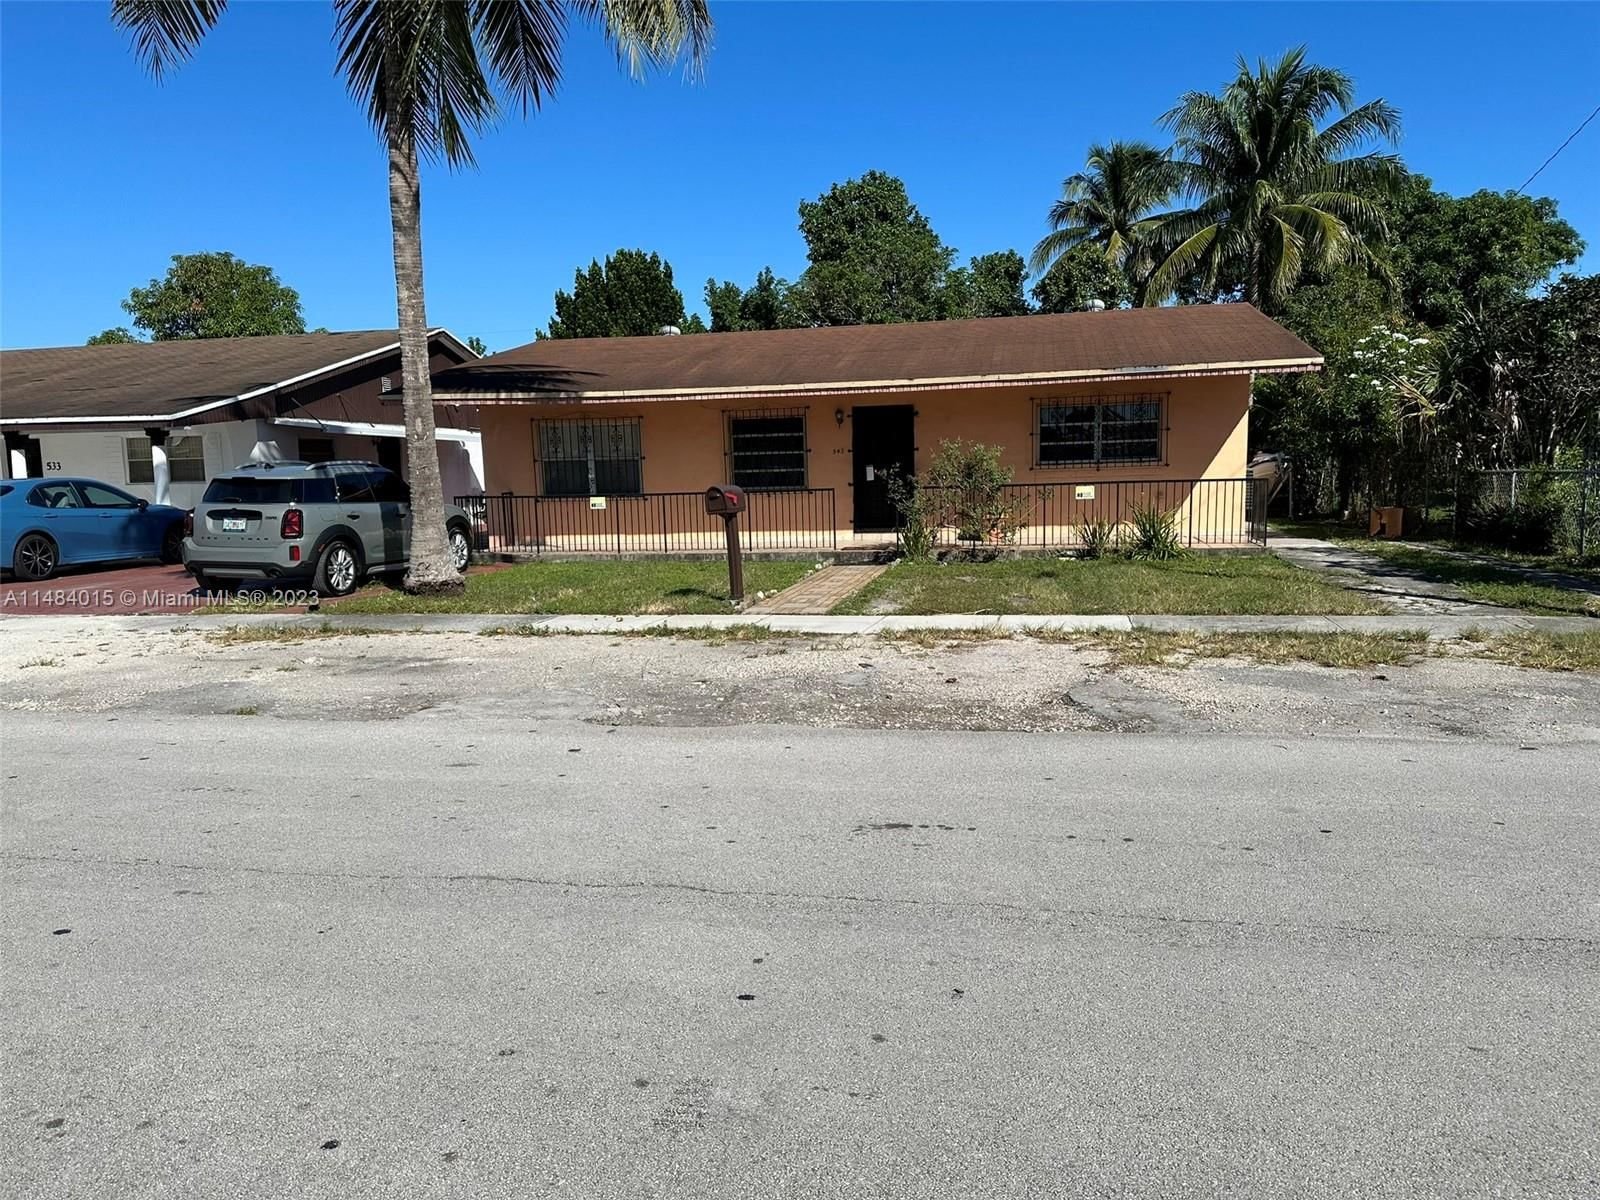 Real estate property located at 543 61st St, Miami-Dade County, GRATIGNY HEIGHTS REV, Hialeah, FL